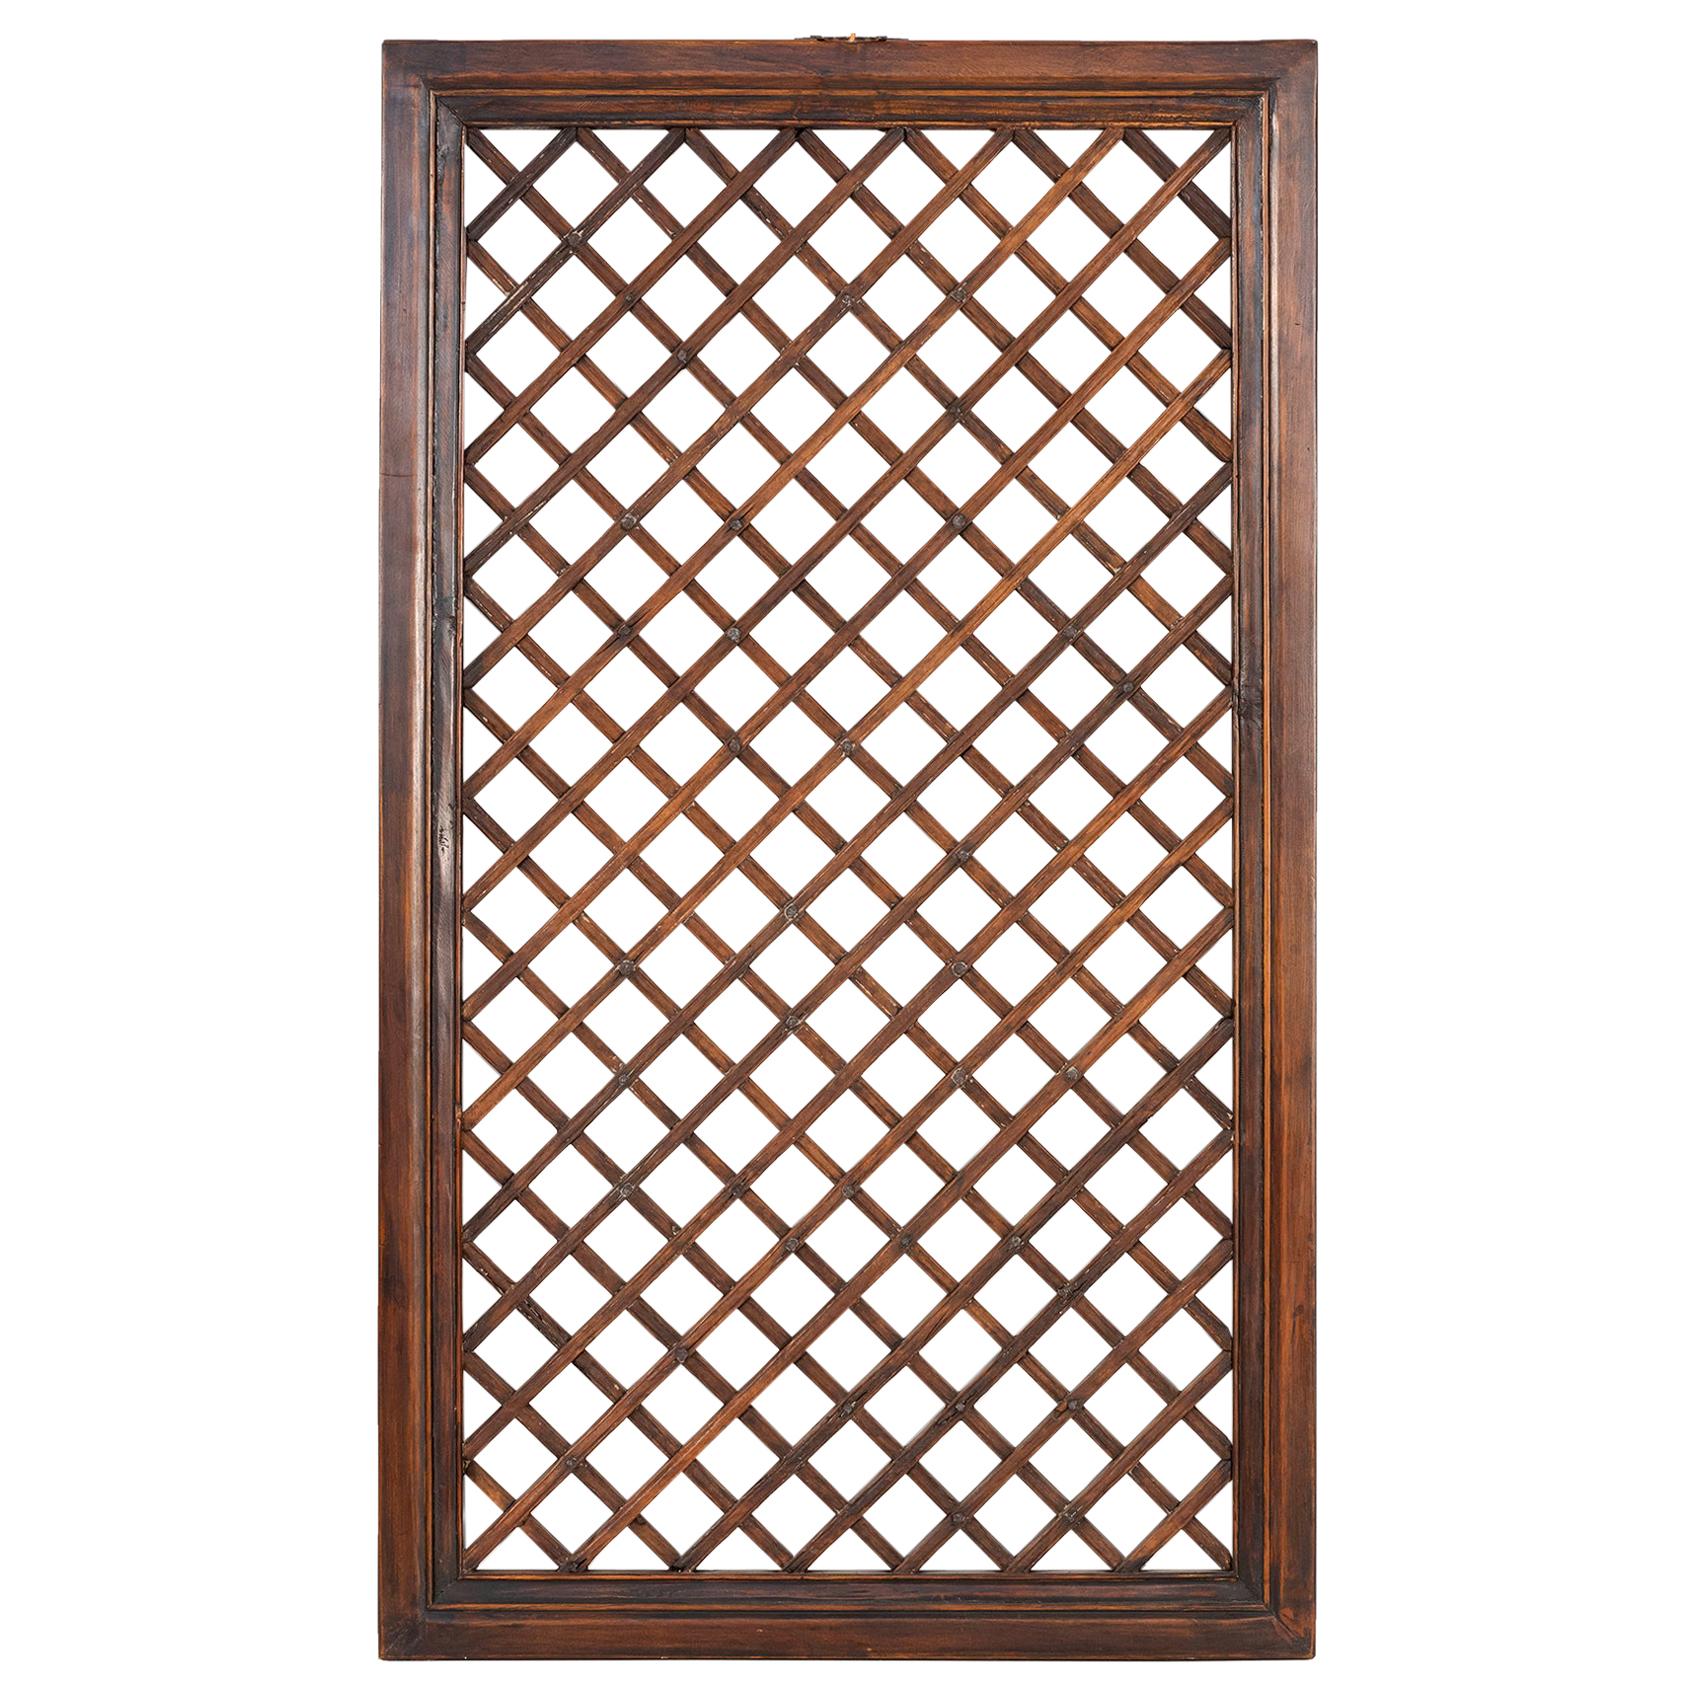 Early 20th Century Chinese Rosewood Lattice Screen